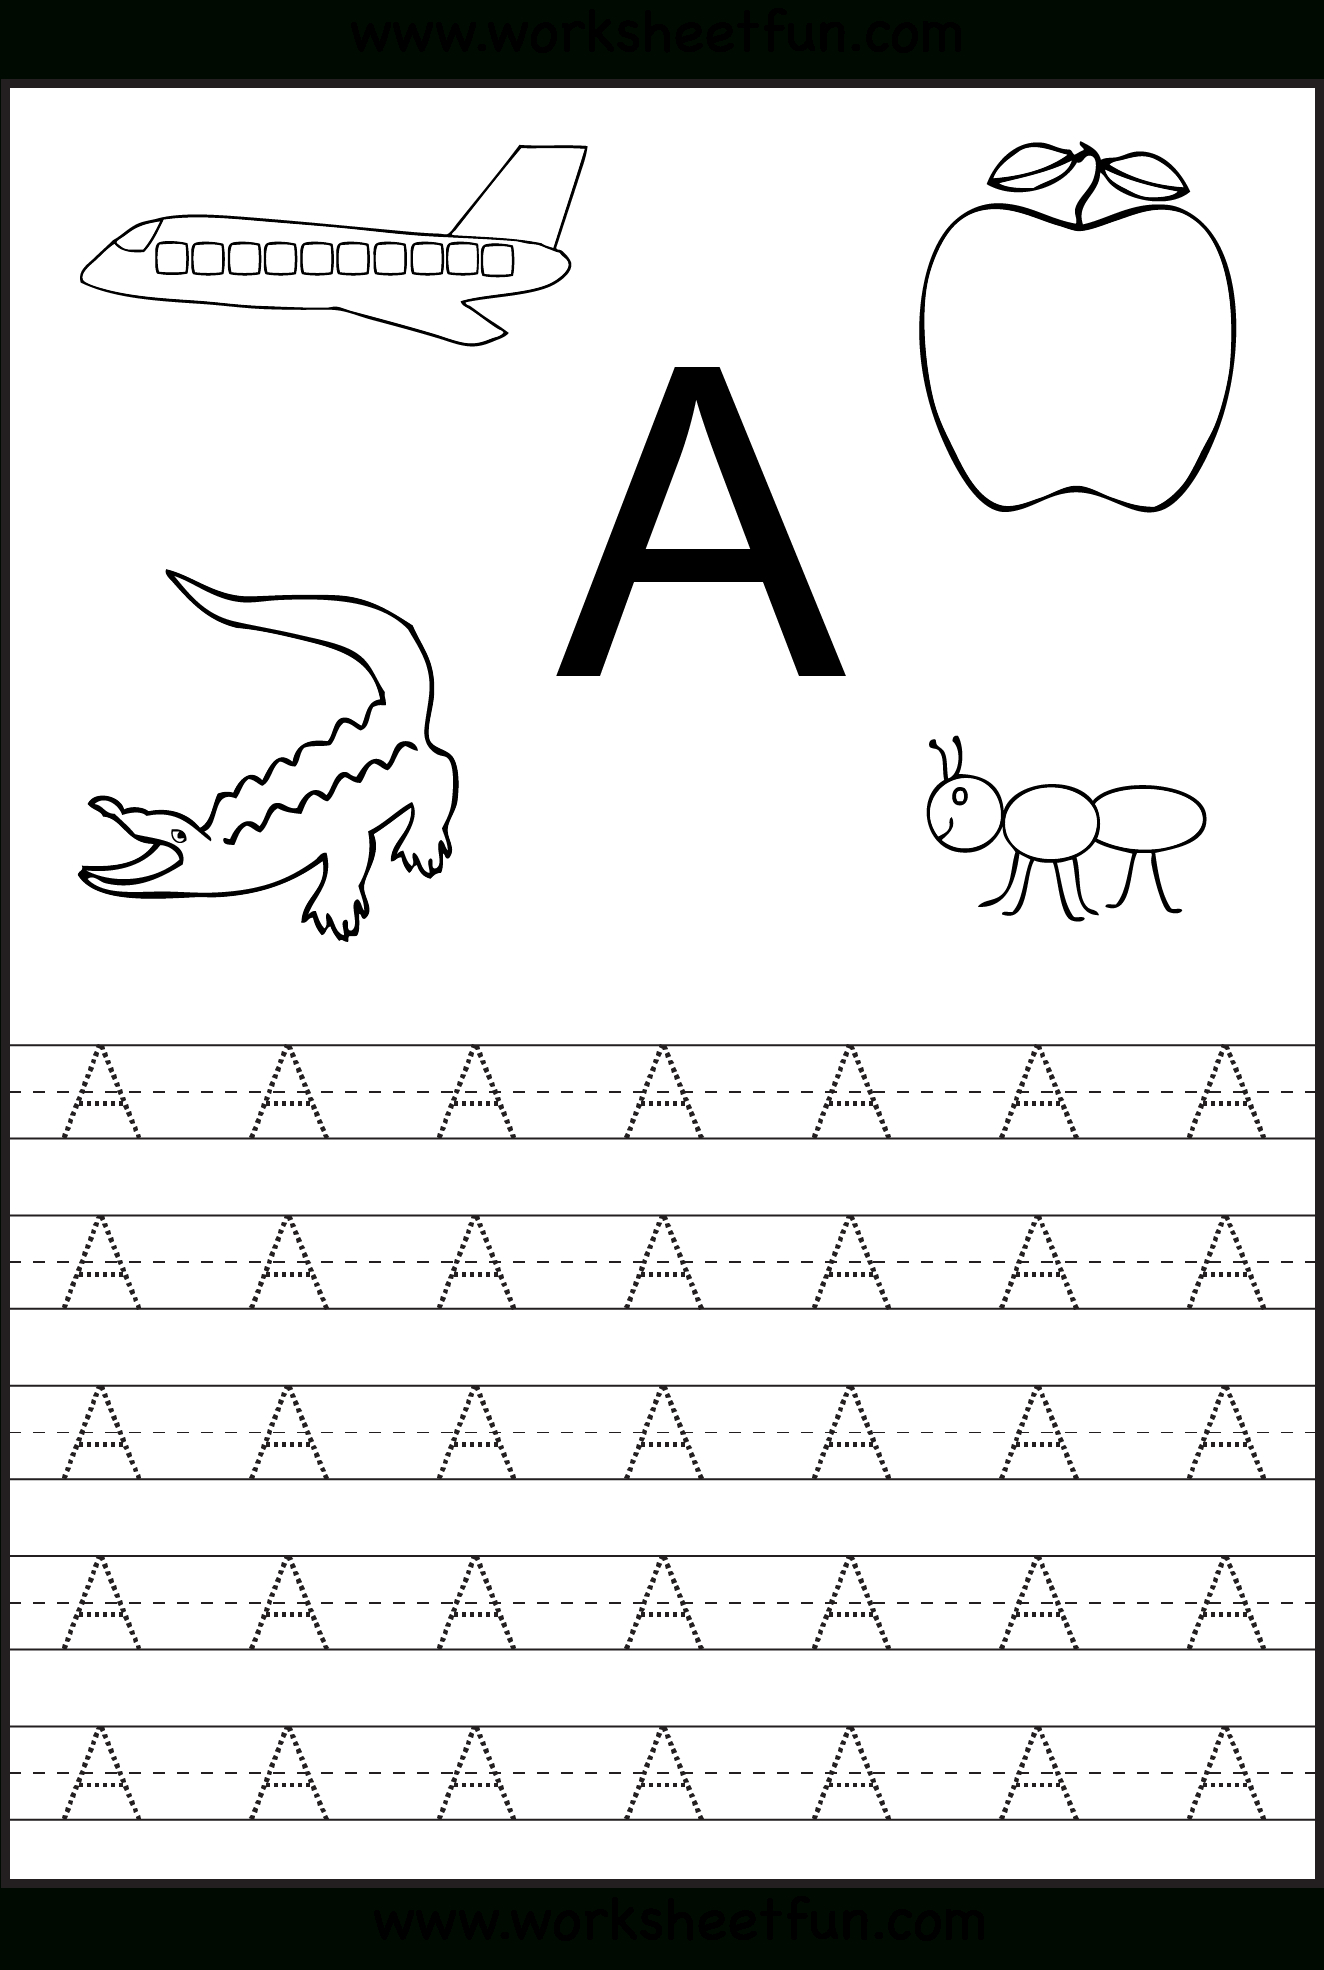 Free Printable Worksheets: Letter Tracing Worksheets For intended for Letters For Tracing Kindergarten